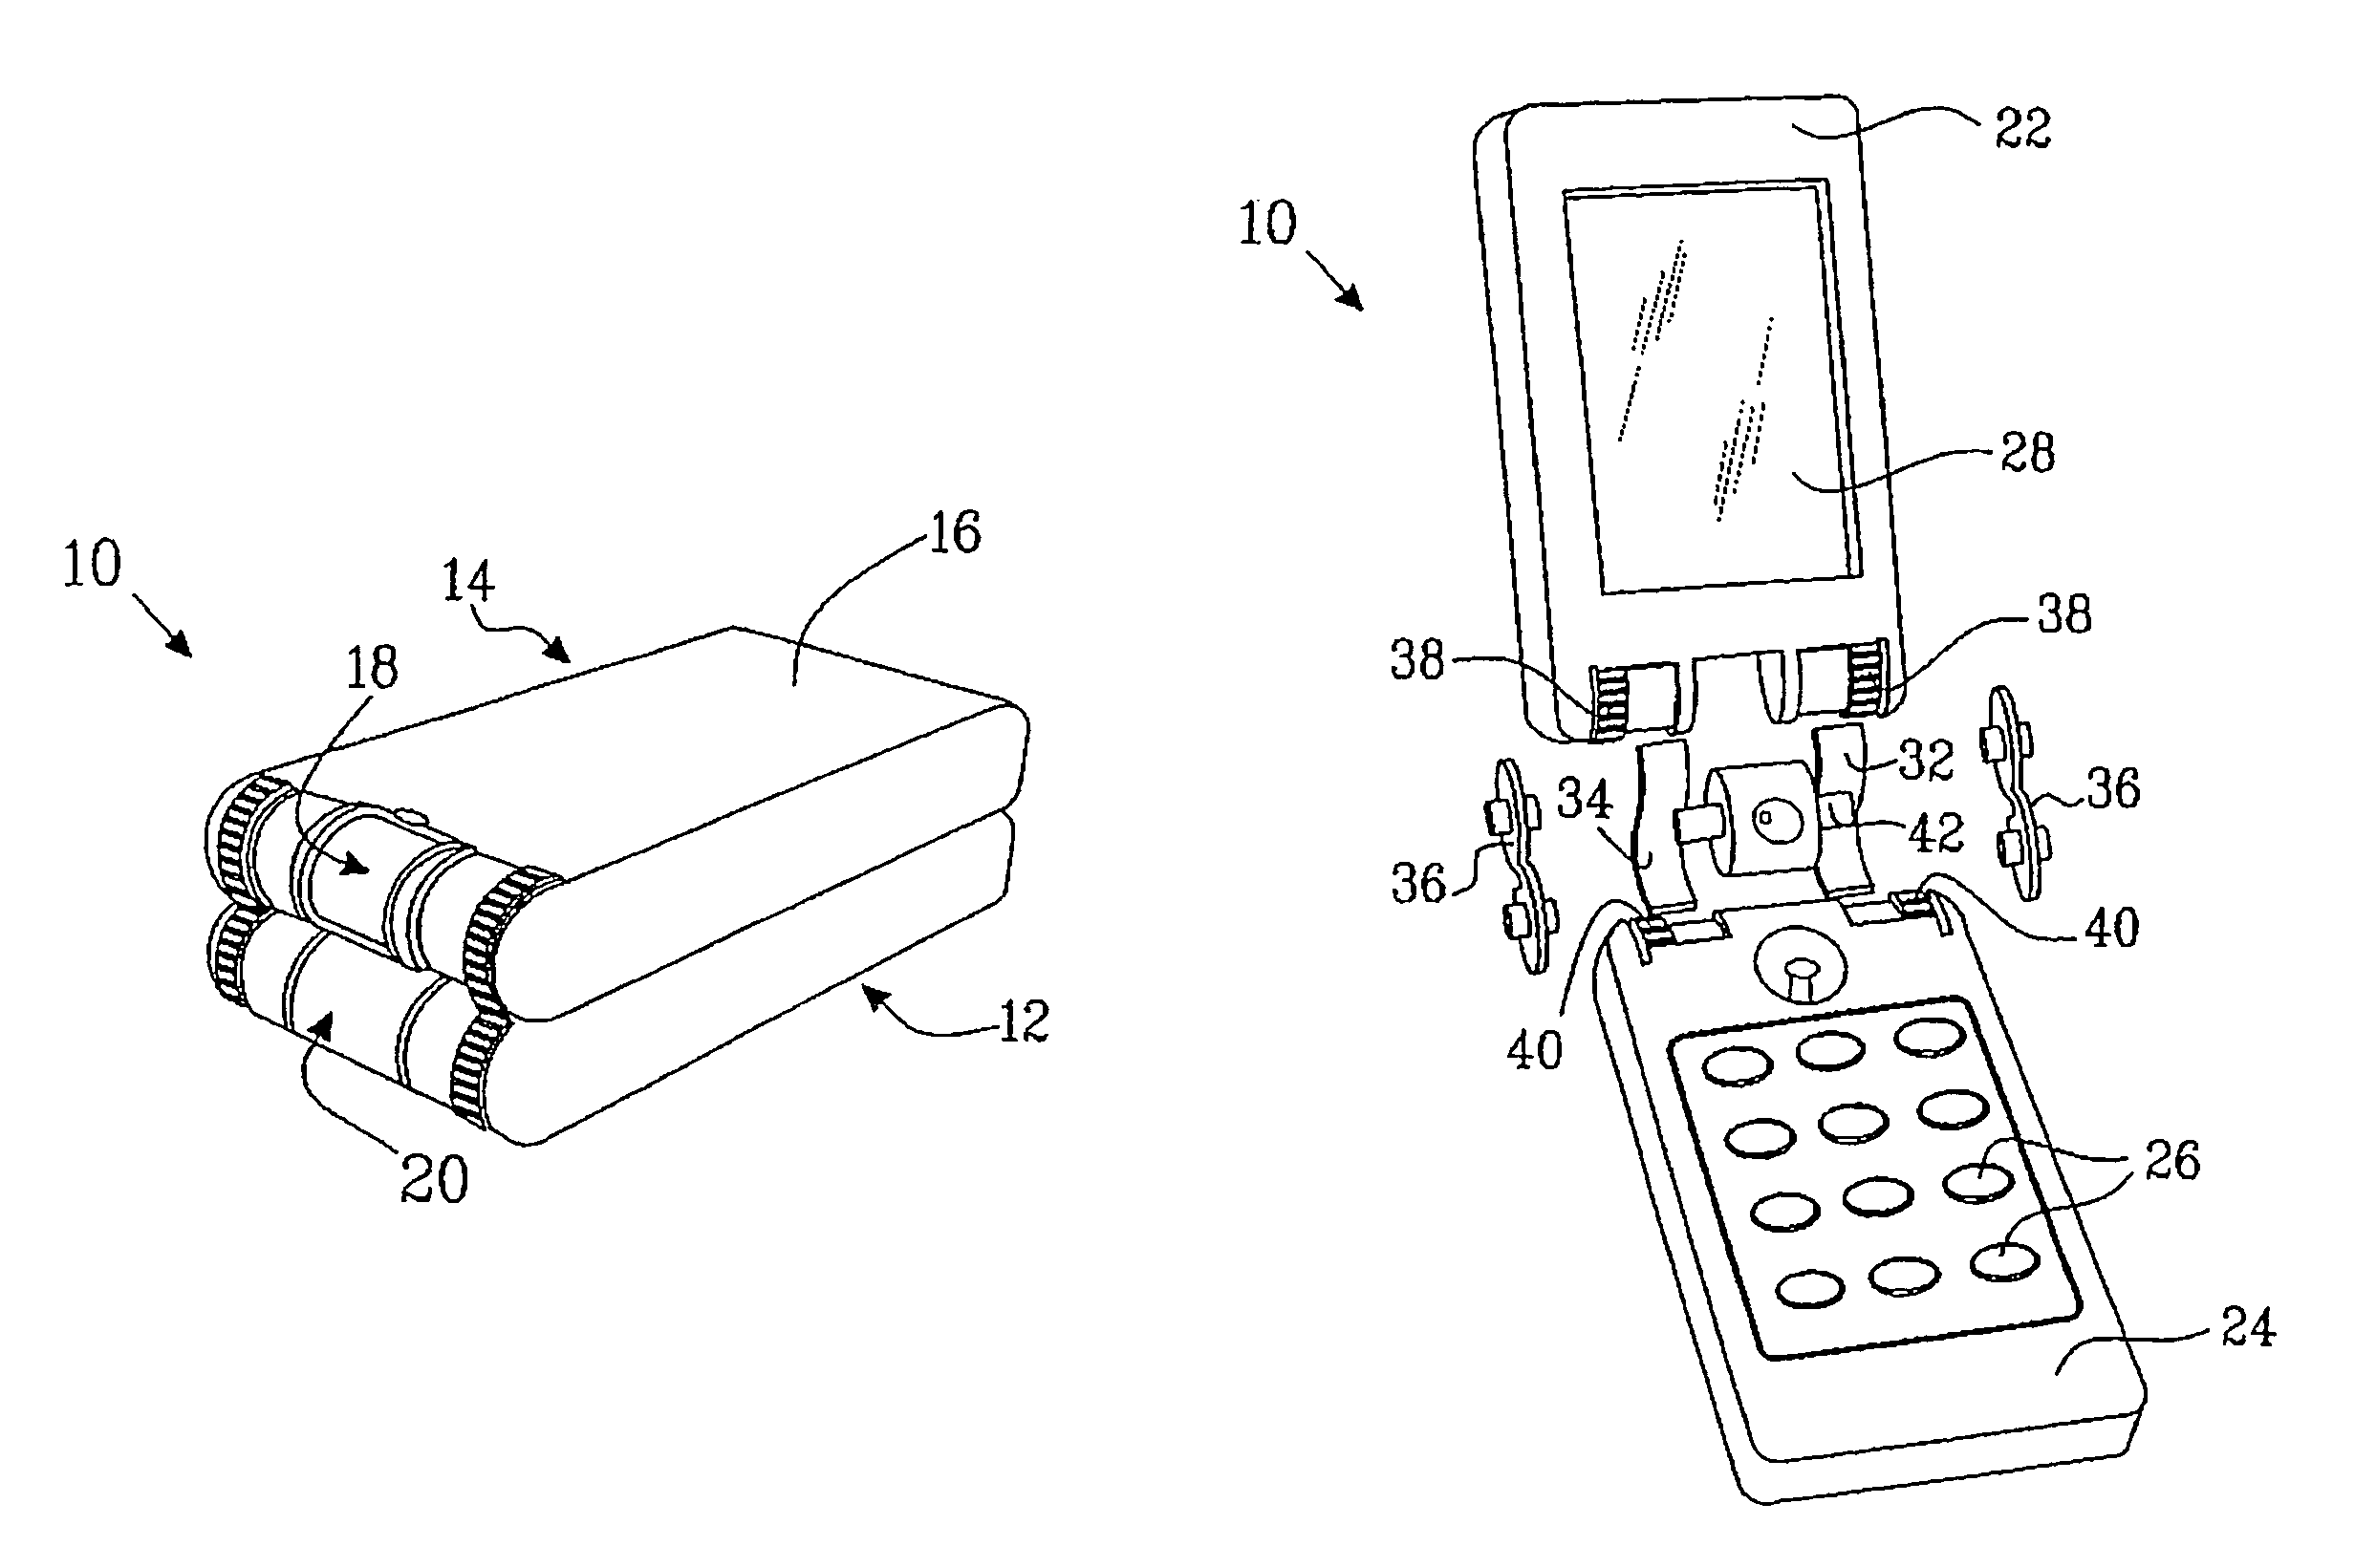 Flexible conductors connected between two parts of a portable electronic device